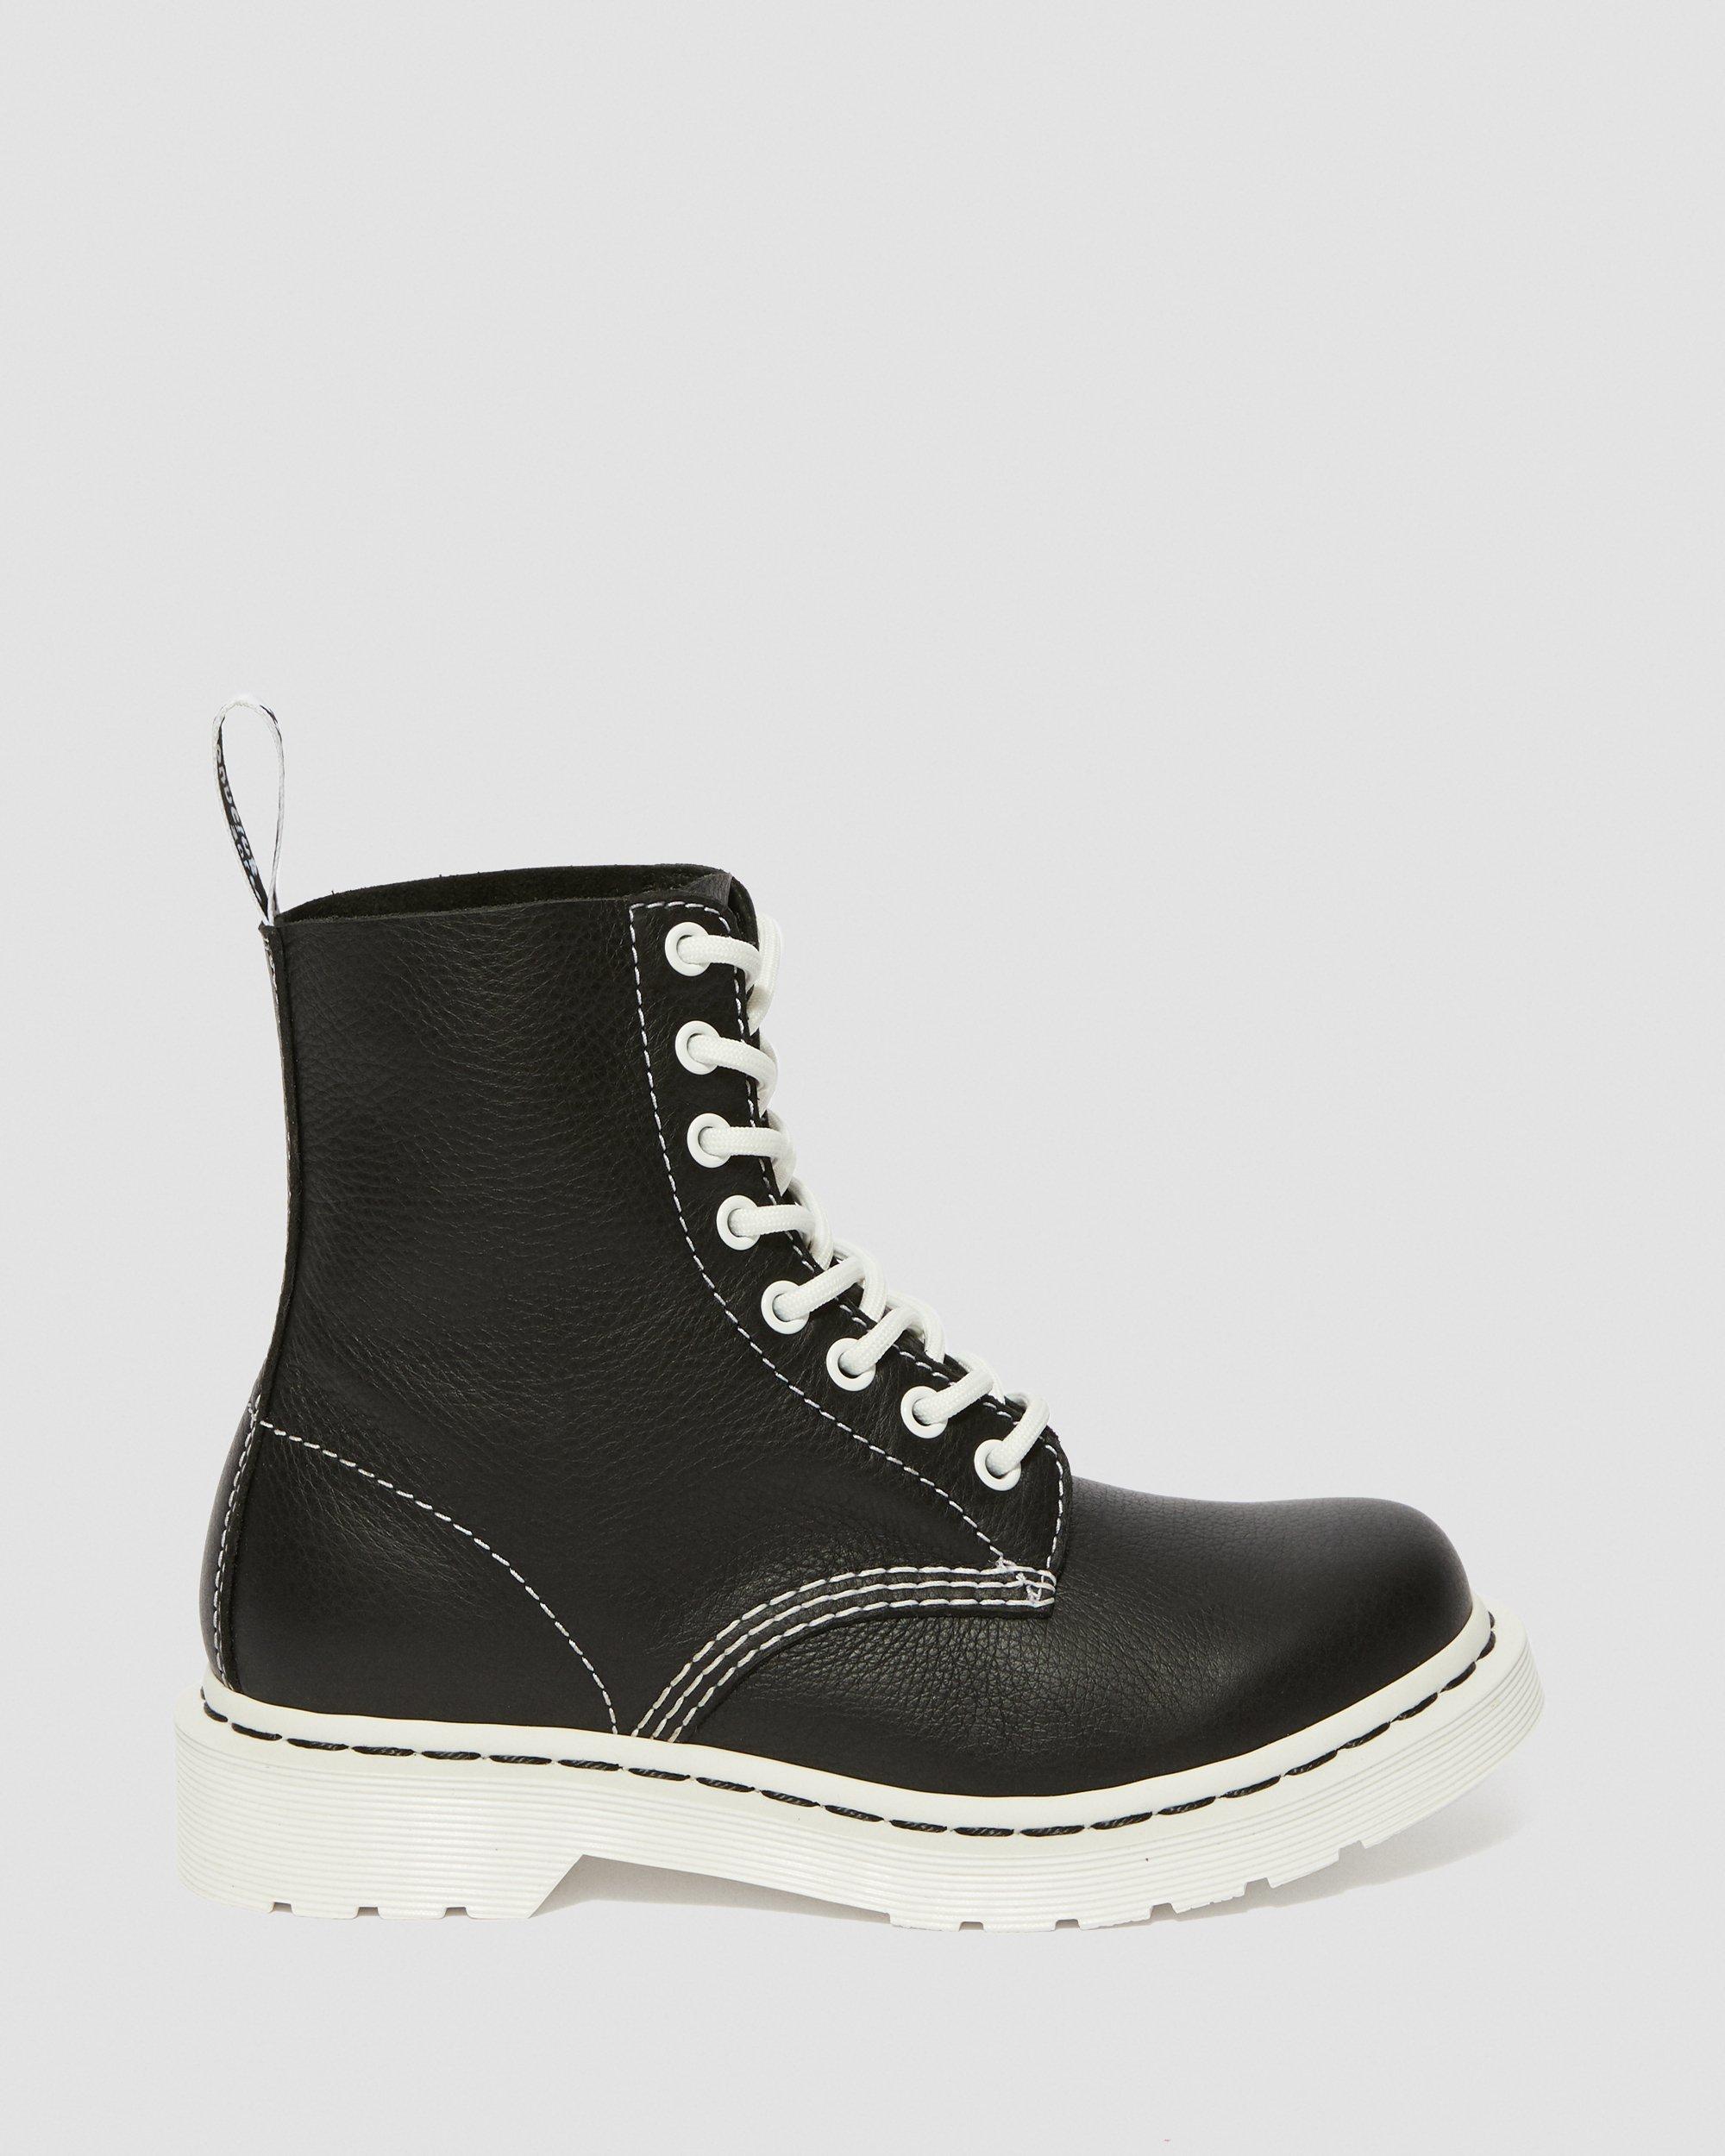 dr martens shoes black and white